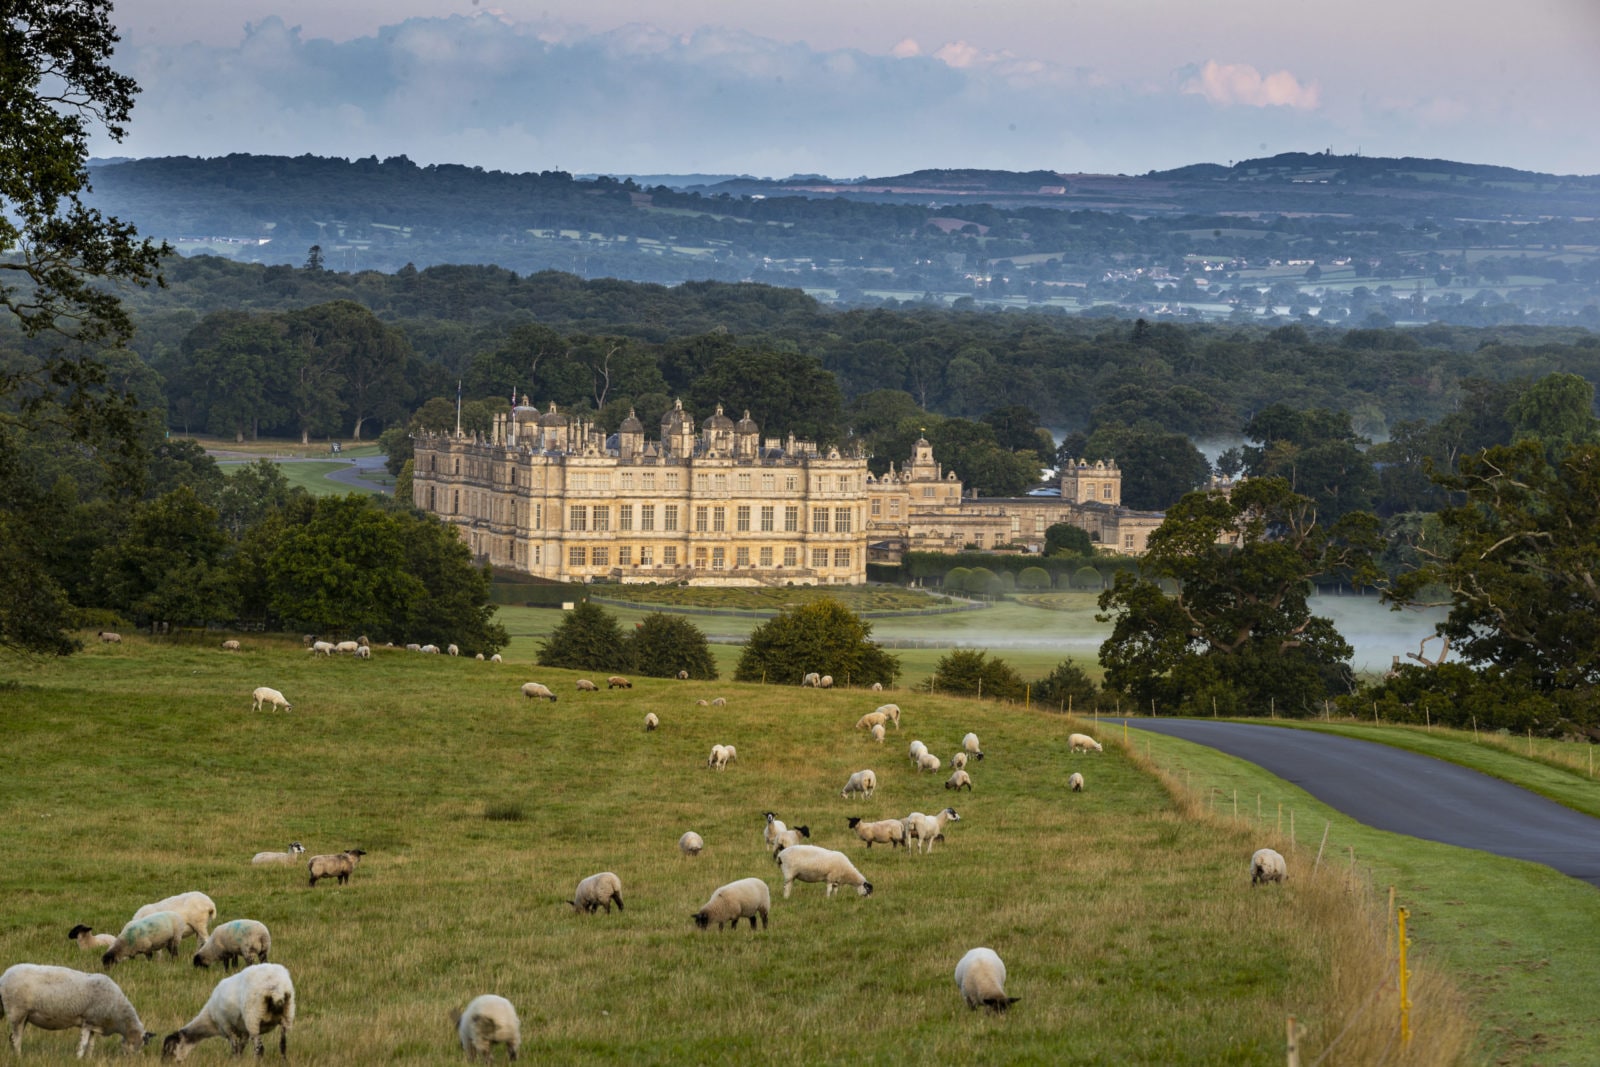 Channel your inner Attenborough and take a break where the wild things are. Longleat House and Estate